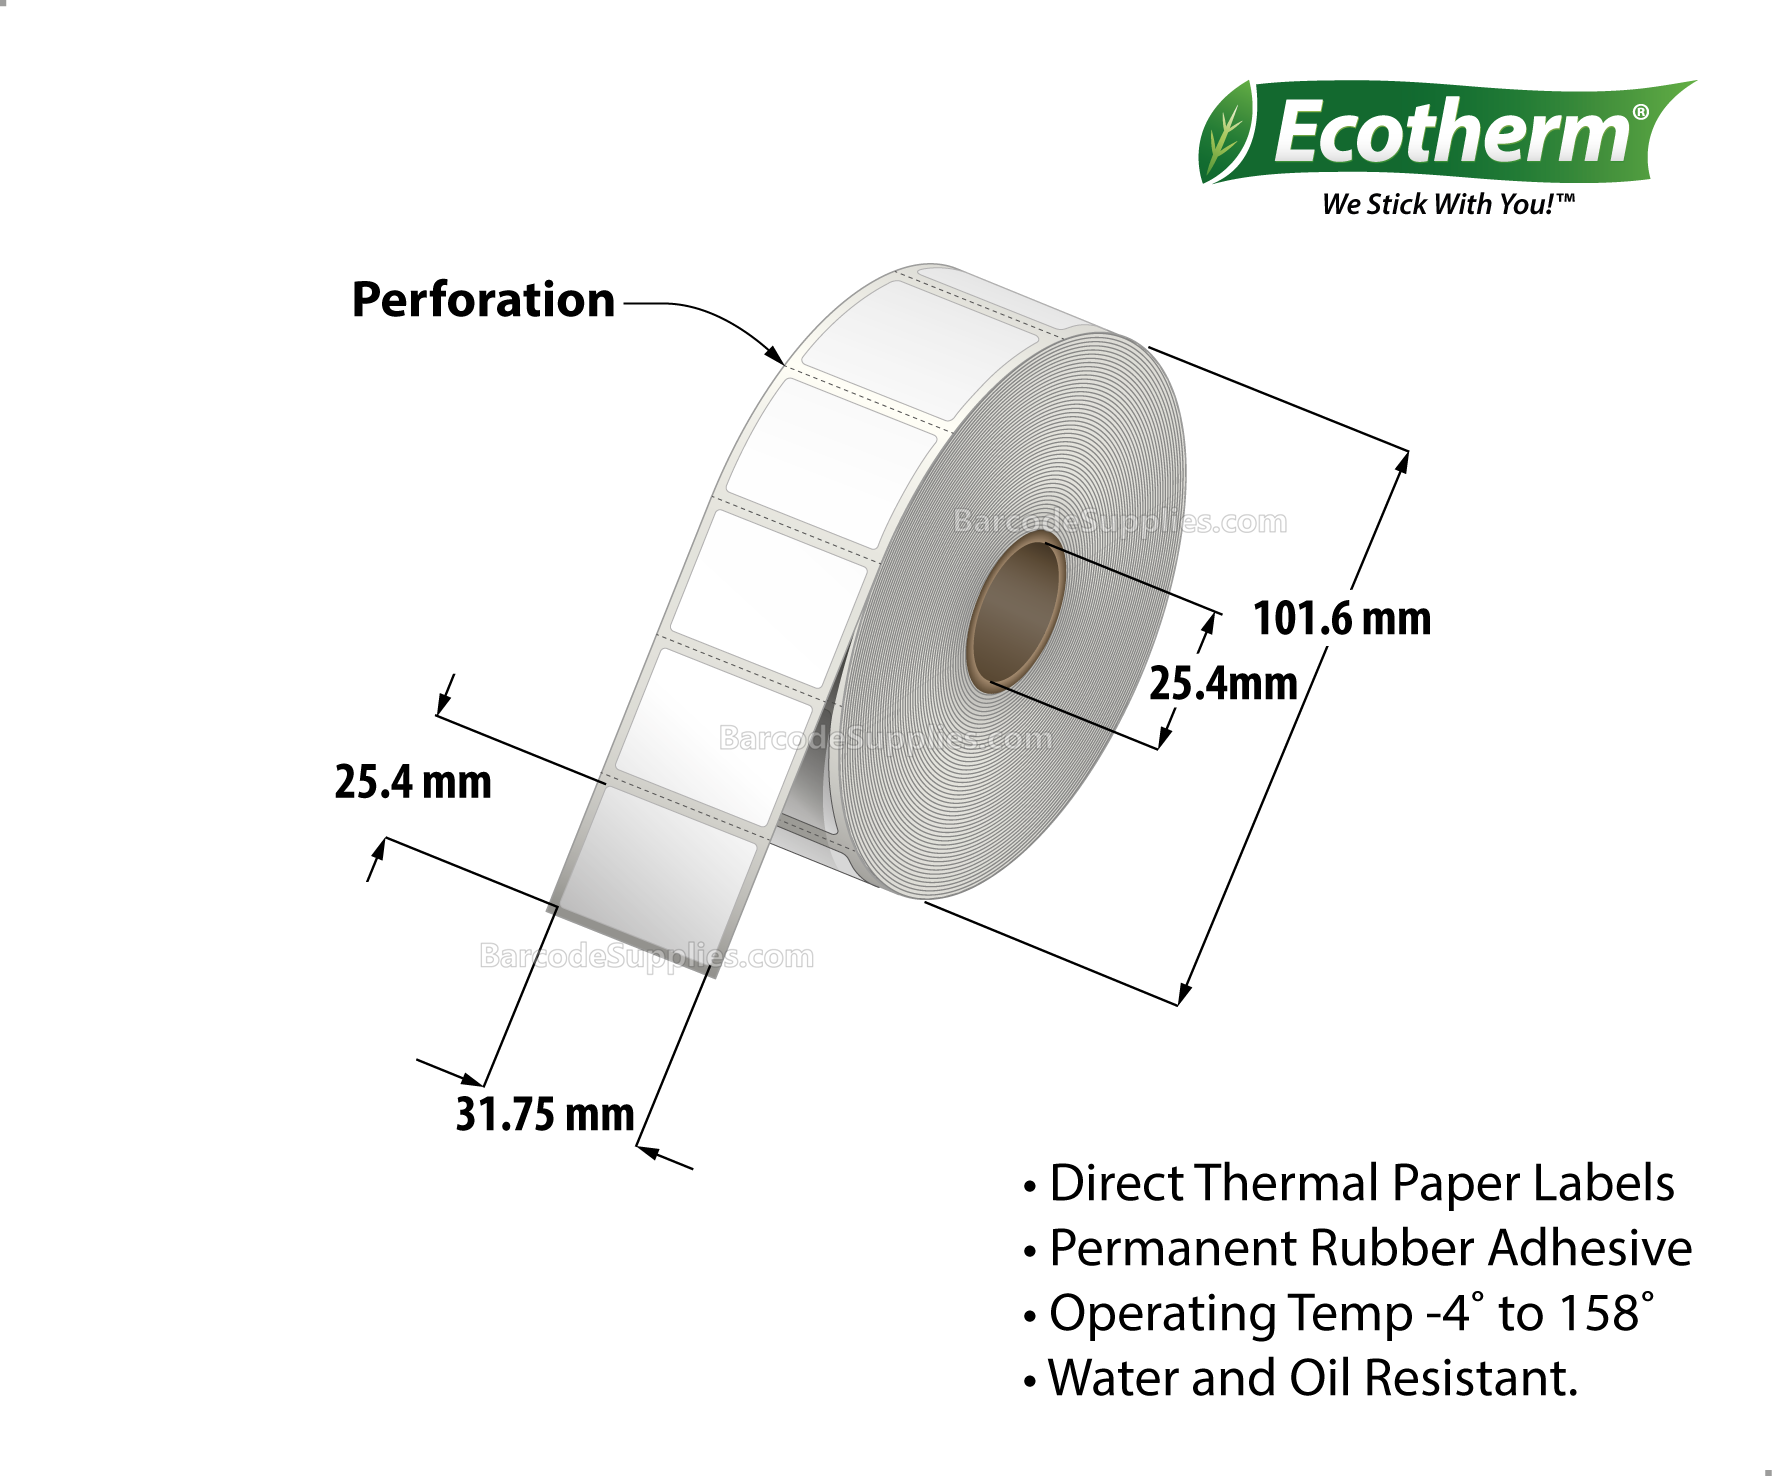 1.25x1 Direct Thermal White Labels With Rubber Adhesive - Perforated - 1380 Labels Per Roll - Carton Of 4 Rolls - 5,520 Labels Total - MPN: ECOTHERM14136-4